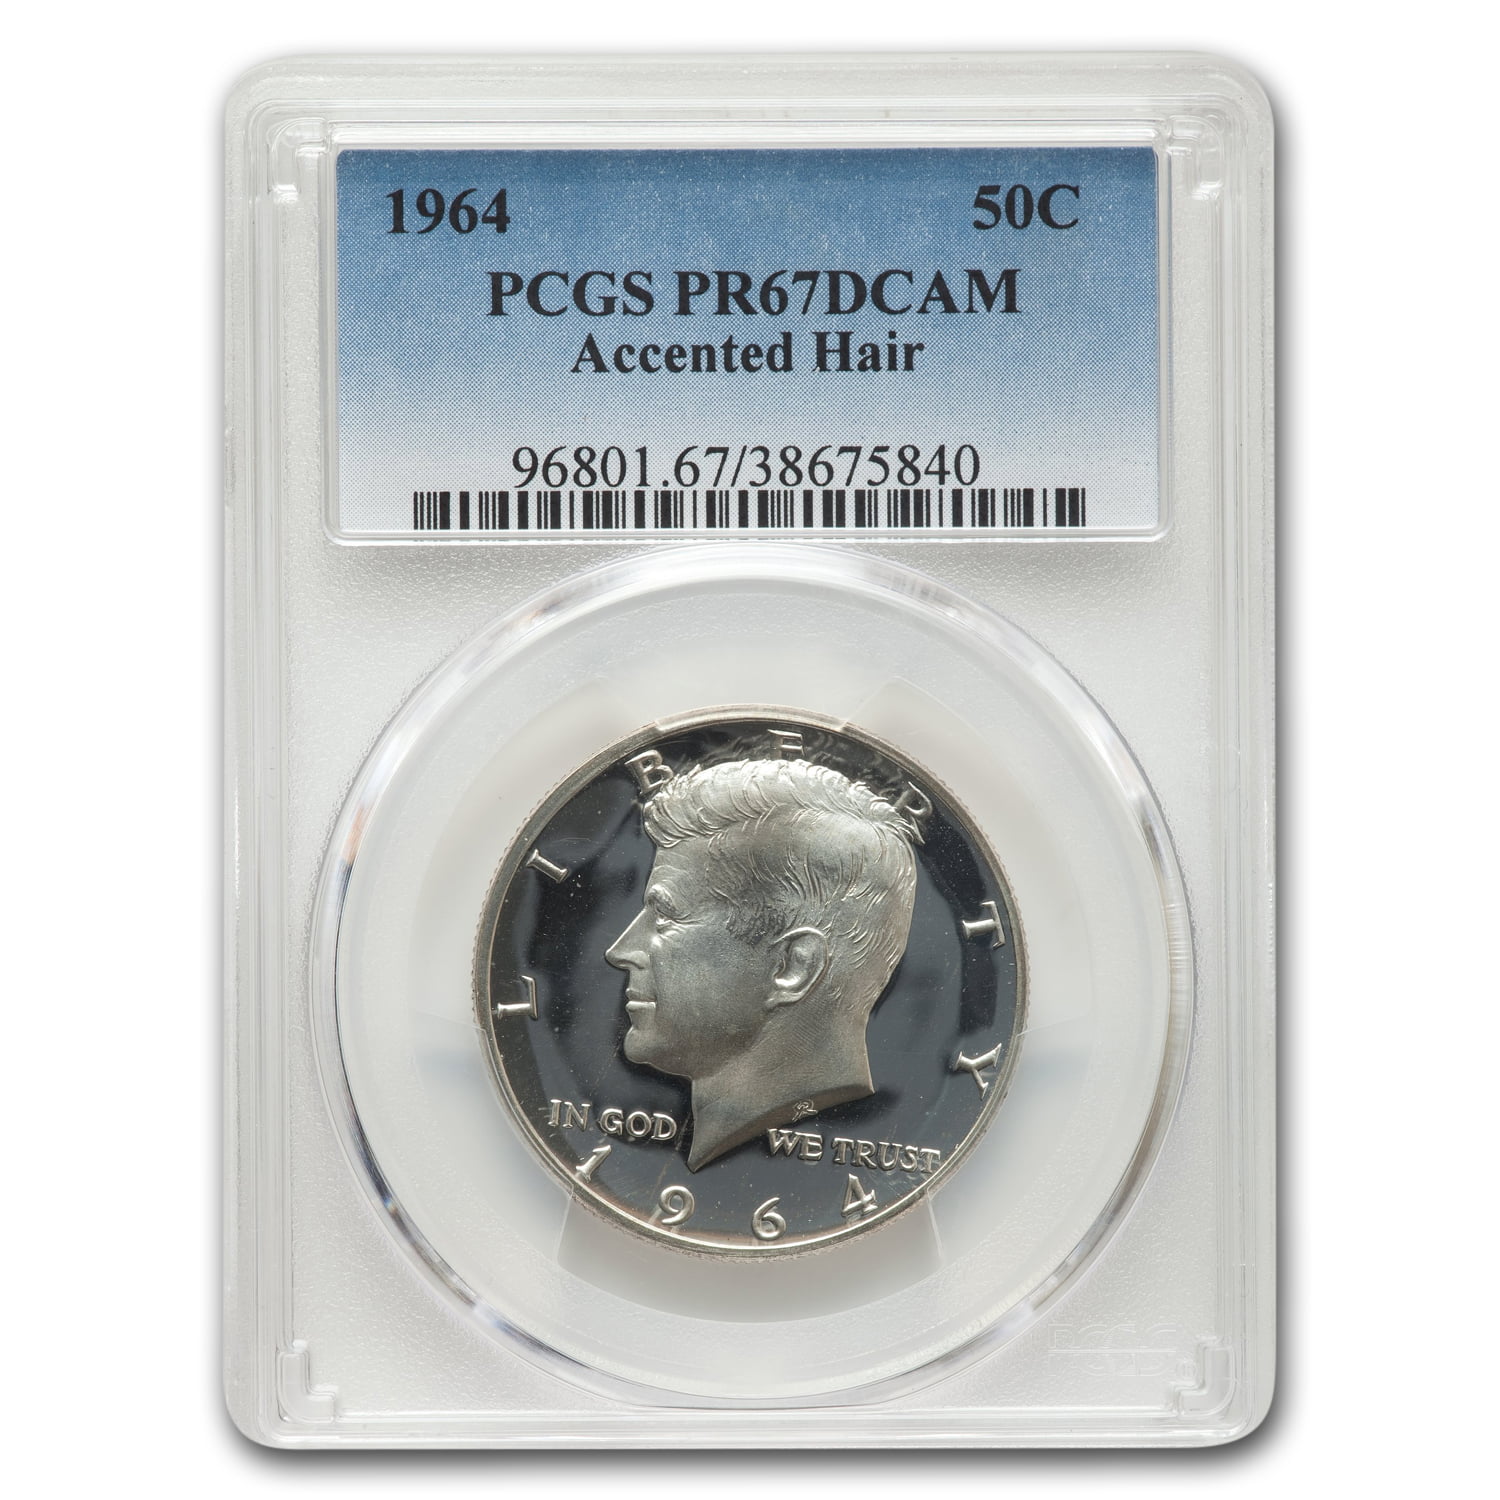 1976-S Kennedy Silver Proof PCGS PR69 DCAM Presidential Signature!